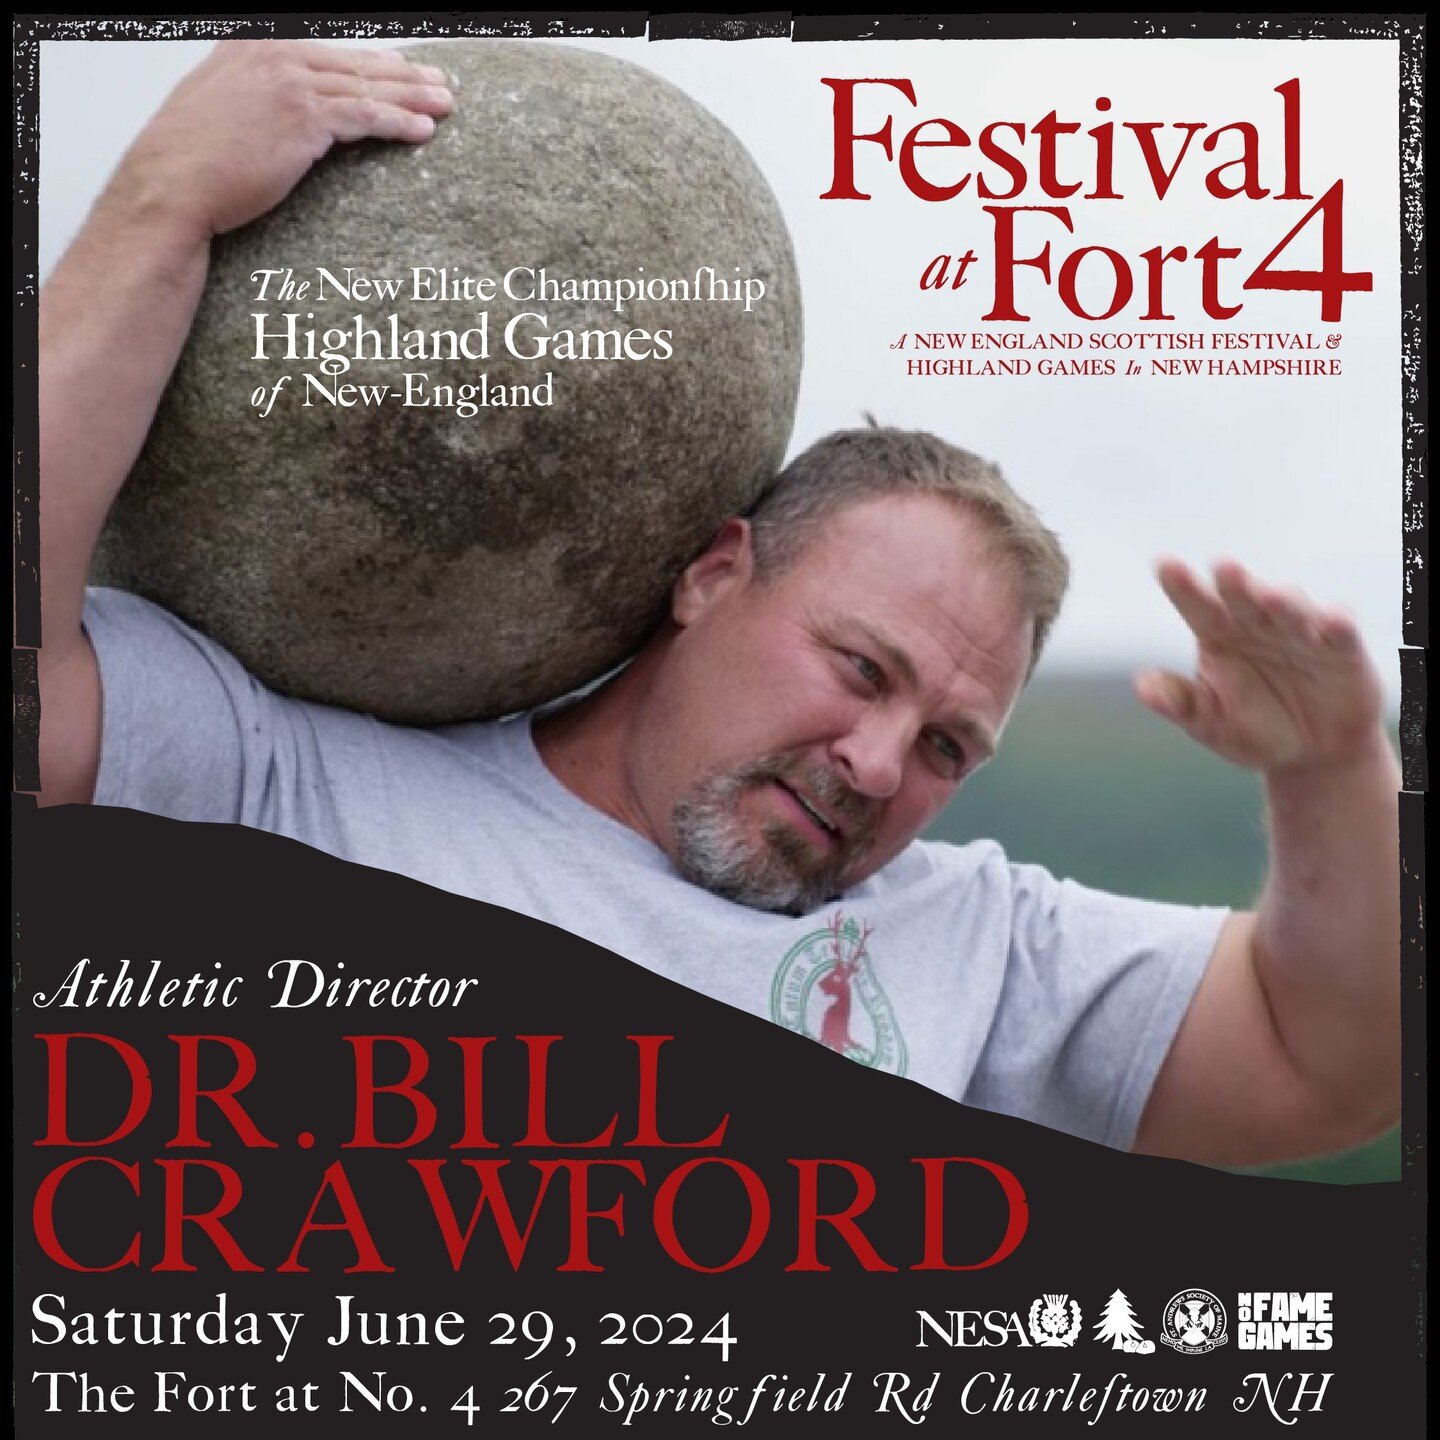 Come see the only New England Highland Games directed by Dr.Bill Crawford. The New Elite Championship Highland Games of New England at The Festival At Fort 4!
Saturday June 29,2024.
Get your tickets today!
#highlandgames #festivalatfort4 #stoneliftin